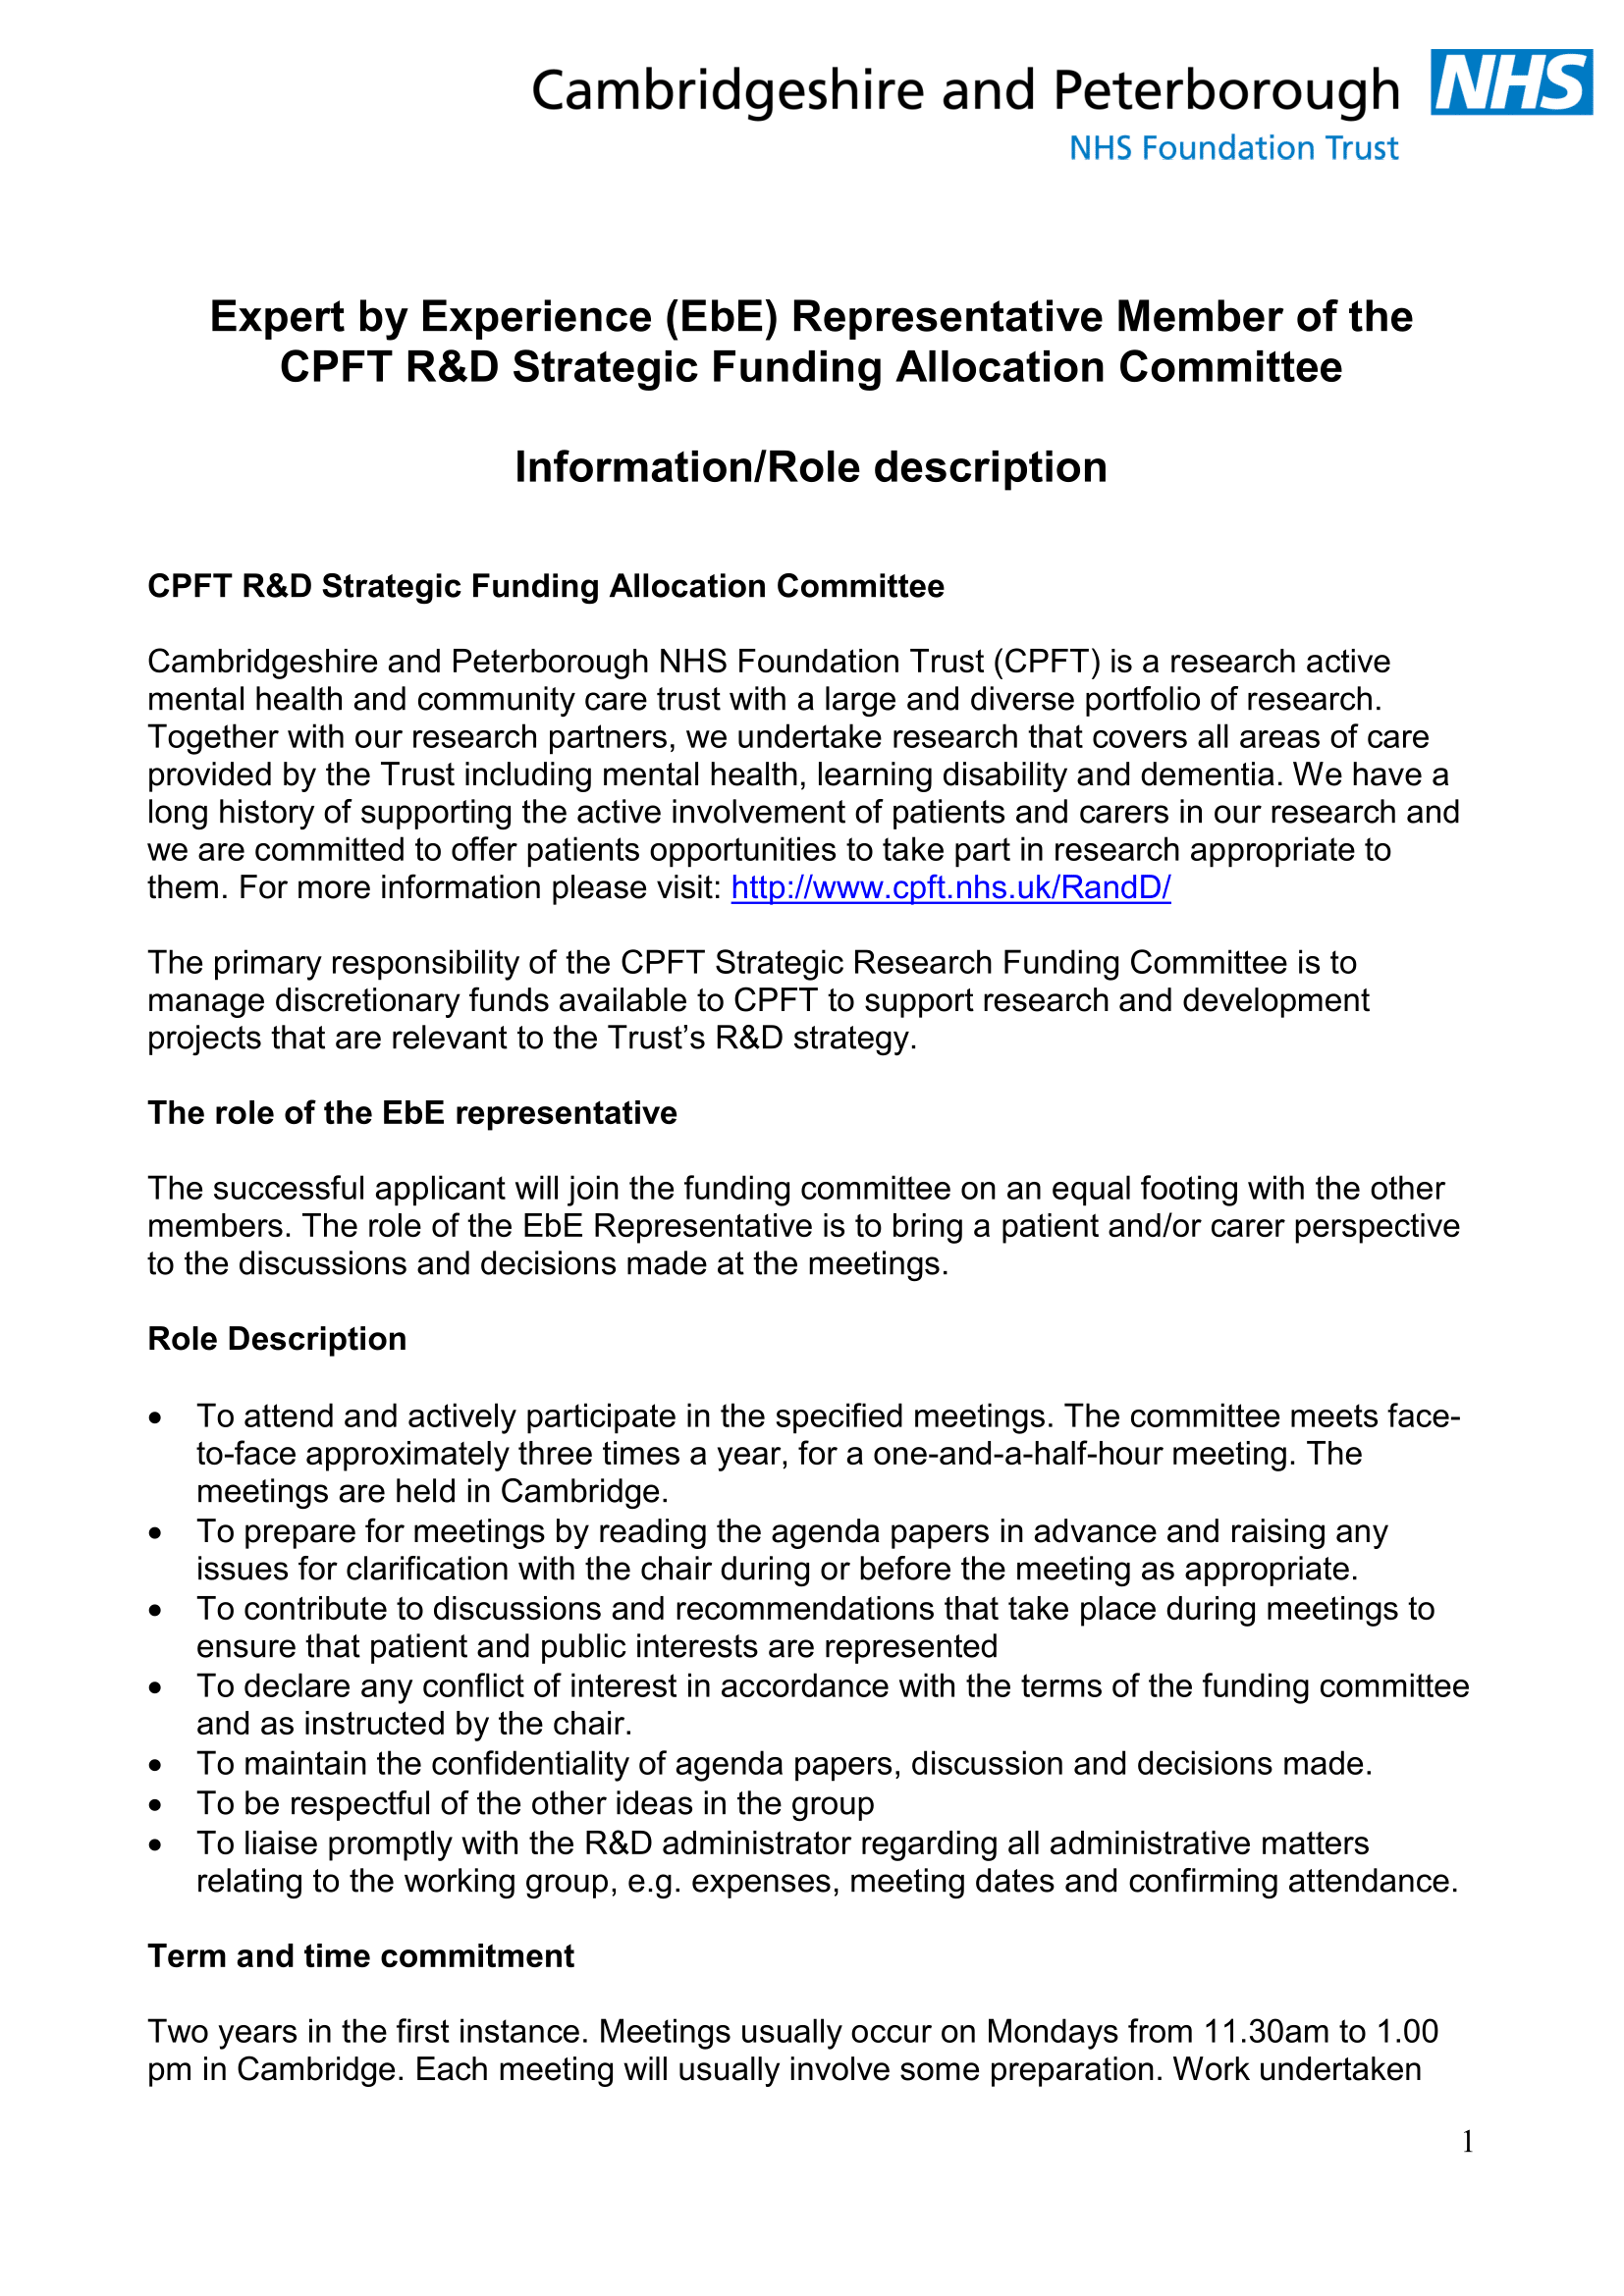 Role description_Expert by Experience Representative_CPFT R&D Funding Allocation Committee-5